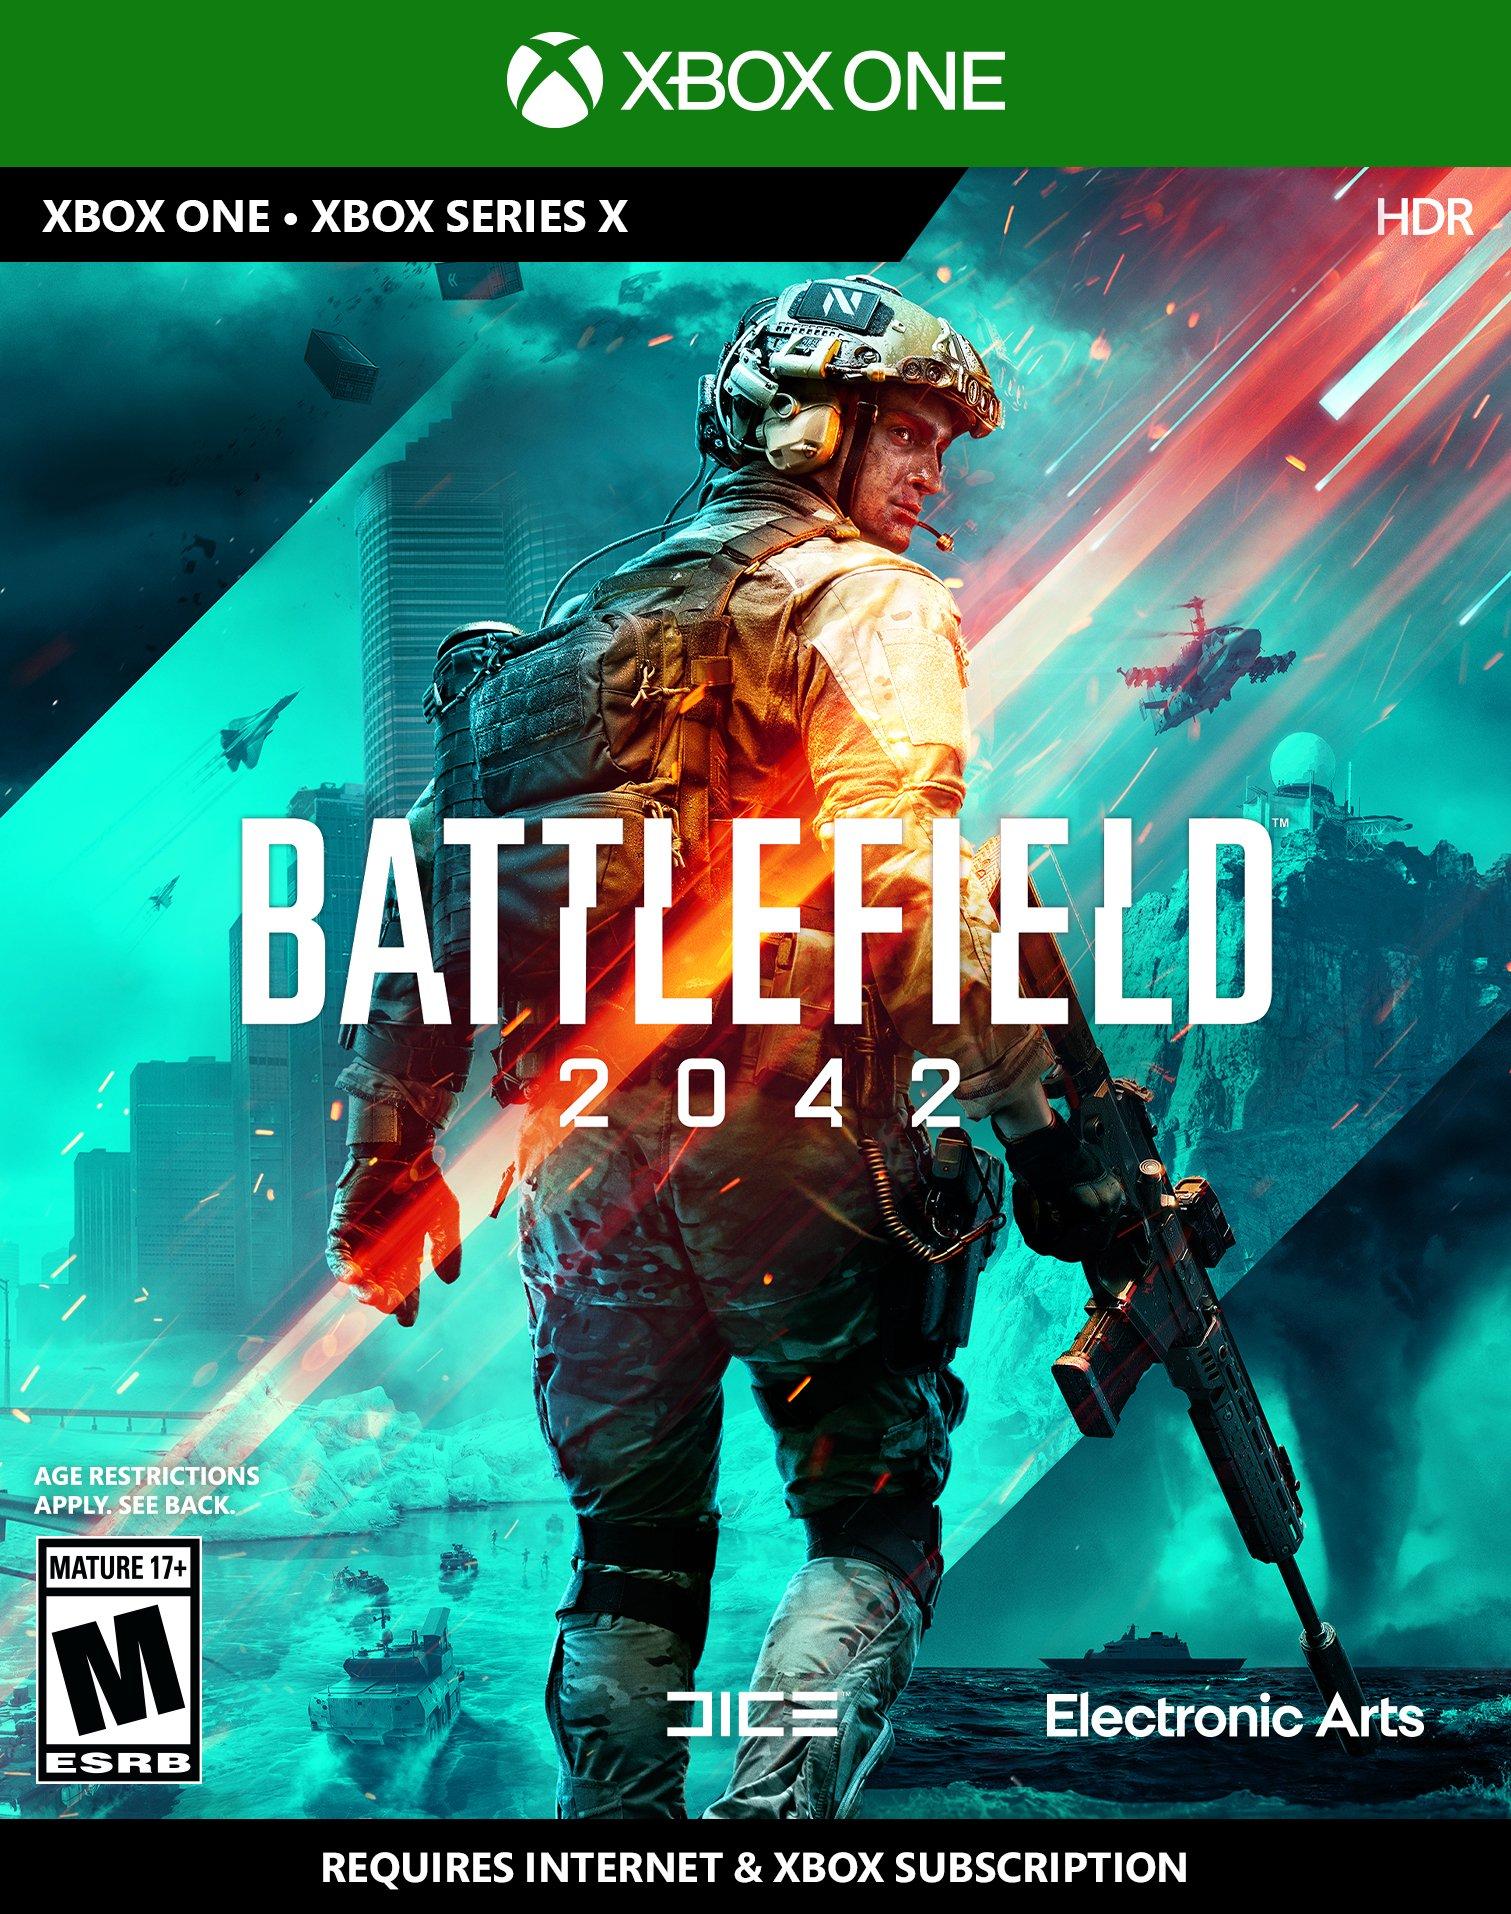 Video game image of "Xbox One: Battlefield 2042"